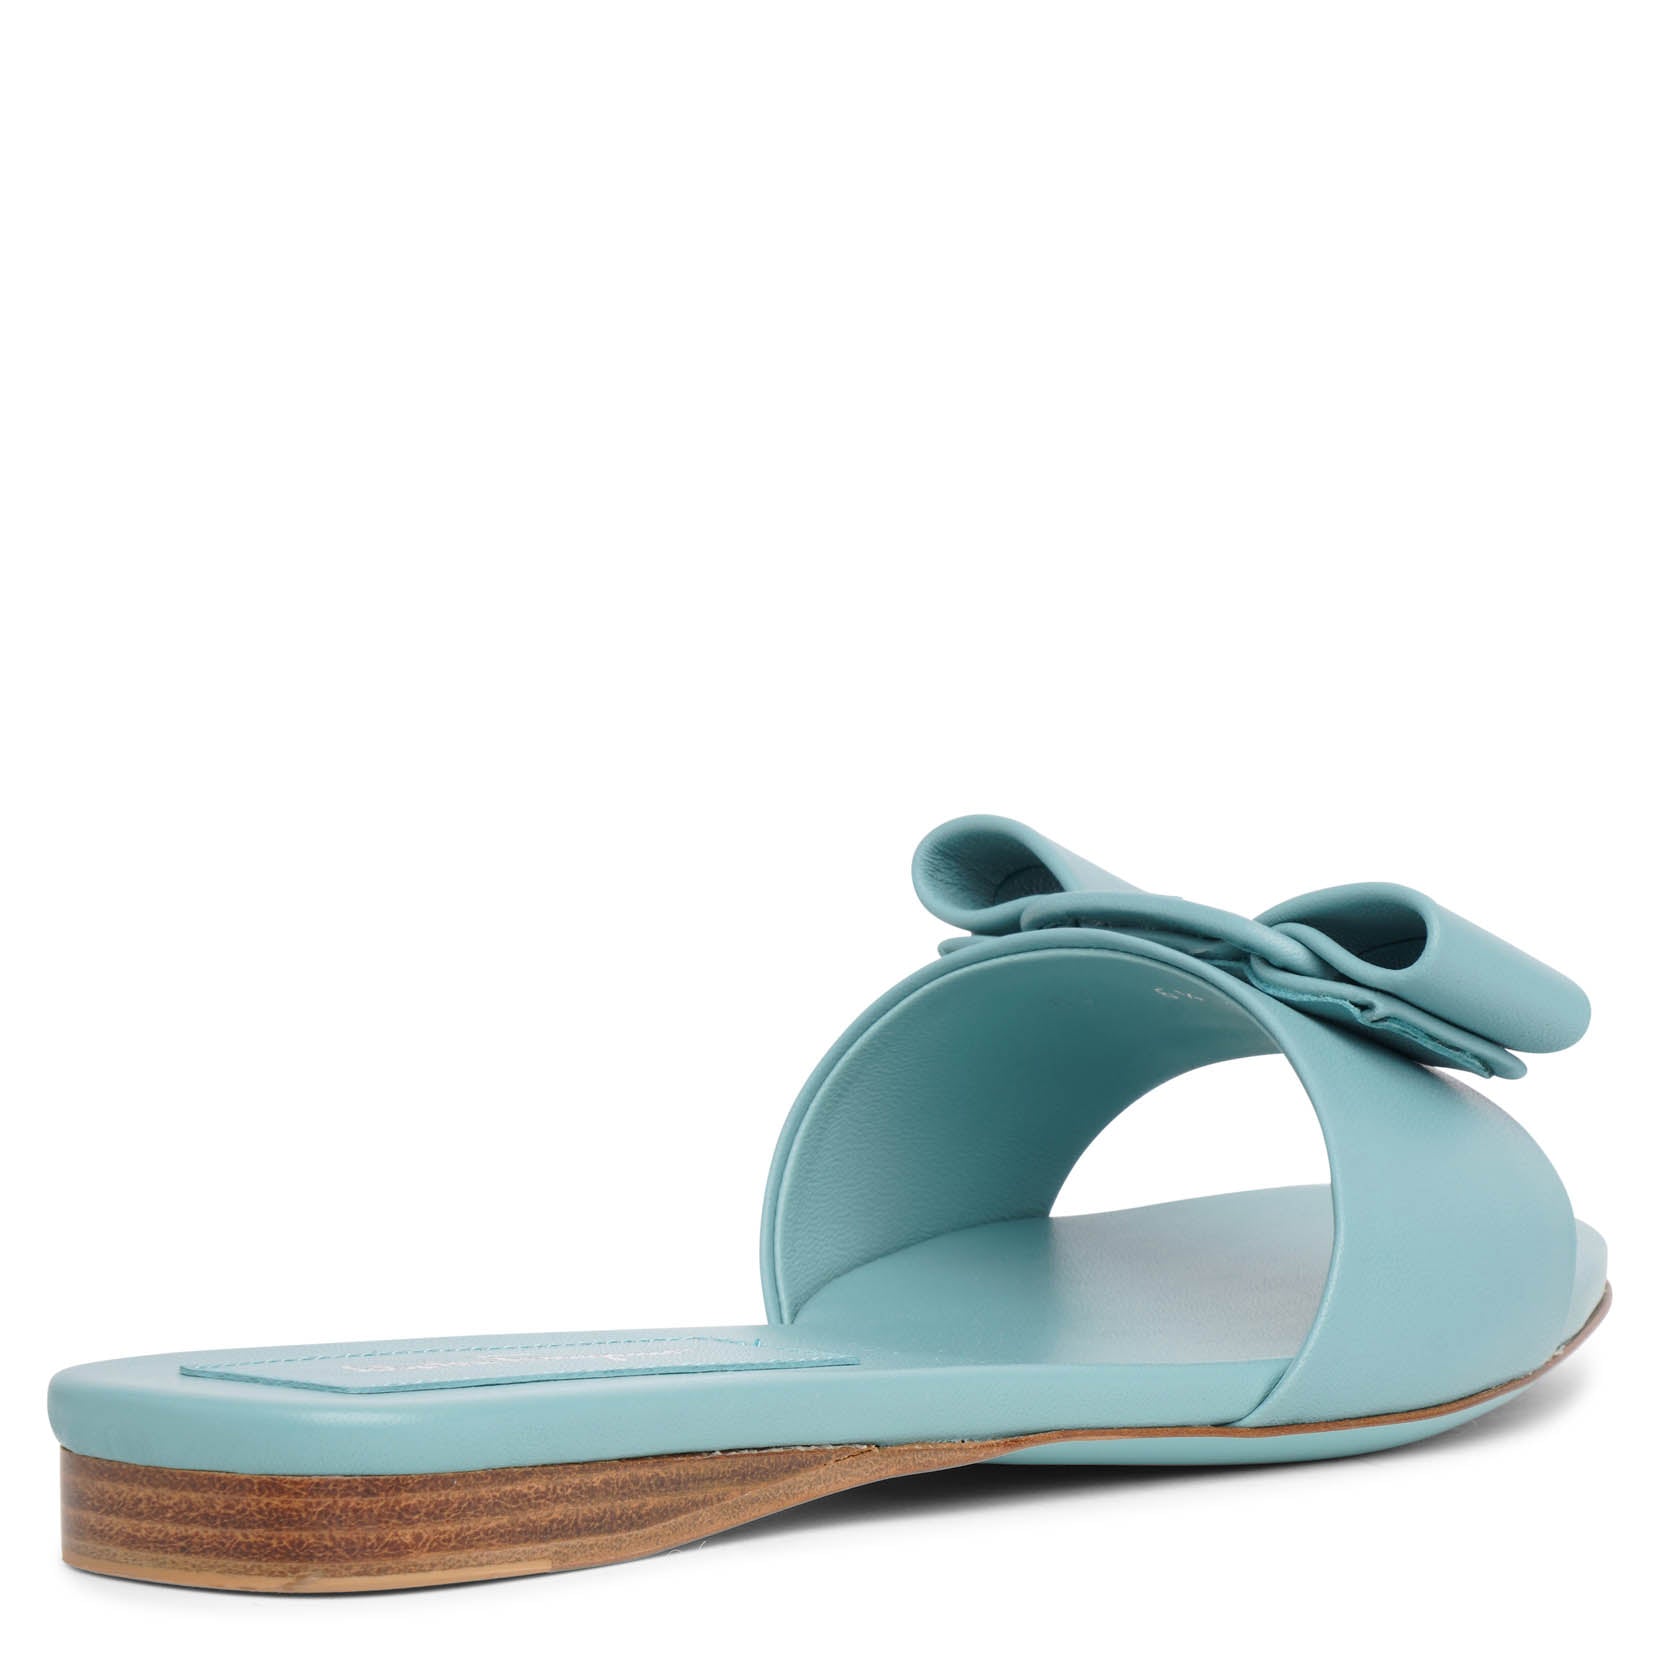 Vicky turquoise leather slides